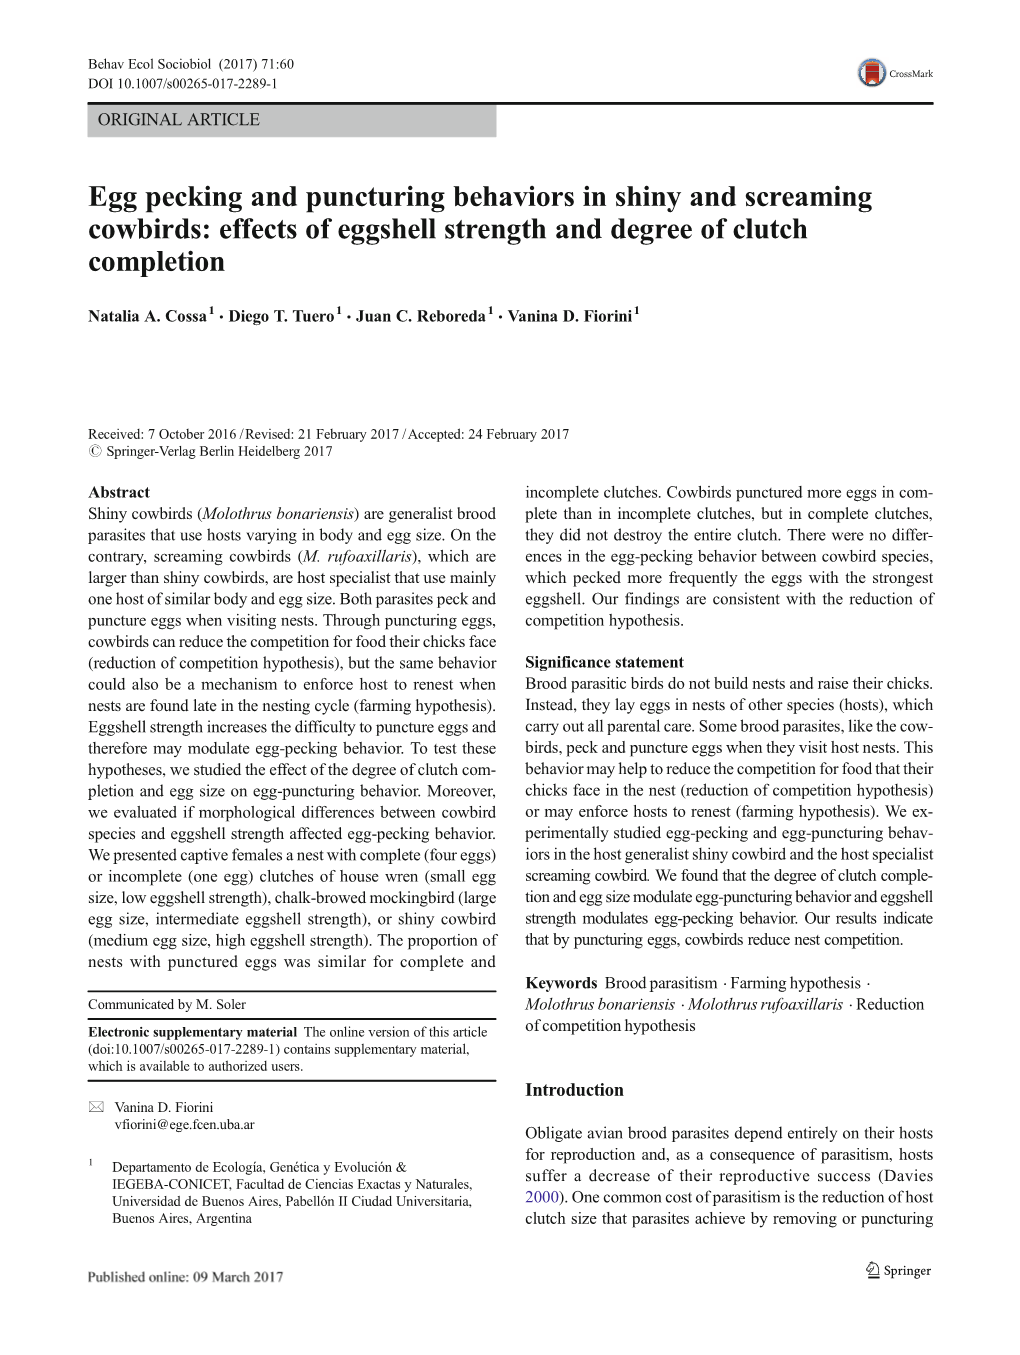 Egg Pecking and Puncturing Behaviors in Shiny and Screaming Cowbirds: Effects of Eggshell Strength and Degree of Clutch Completion